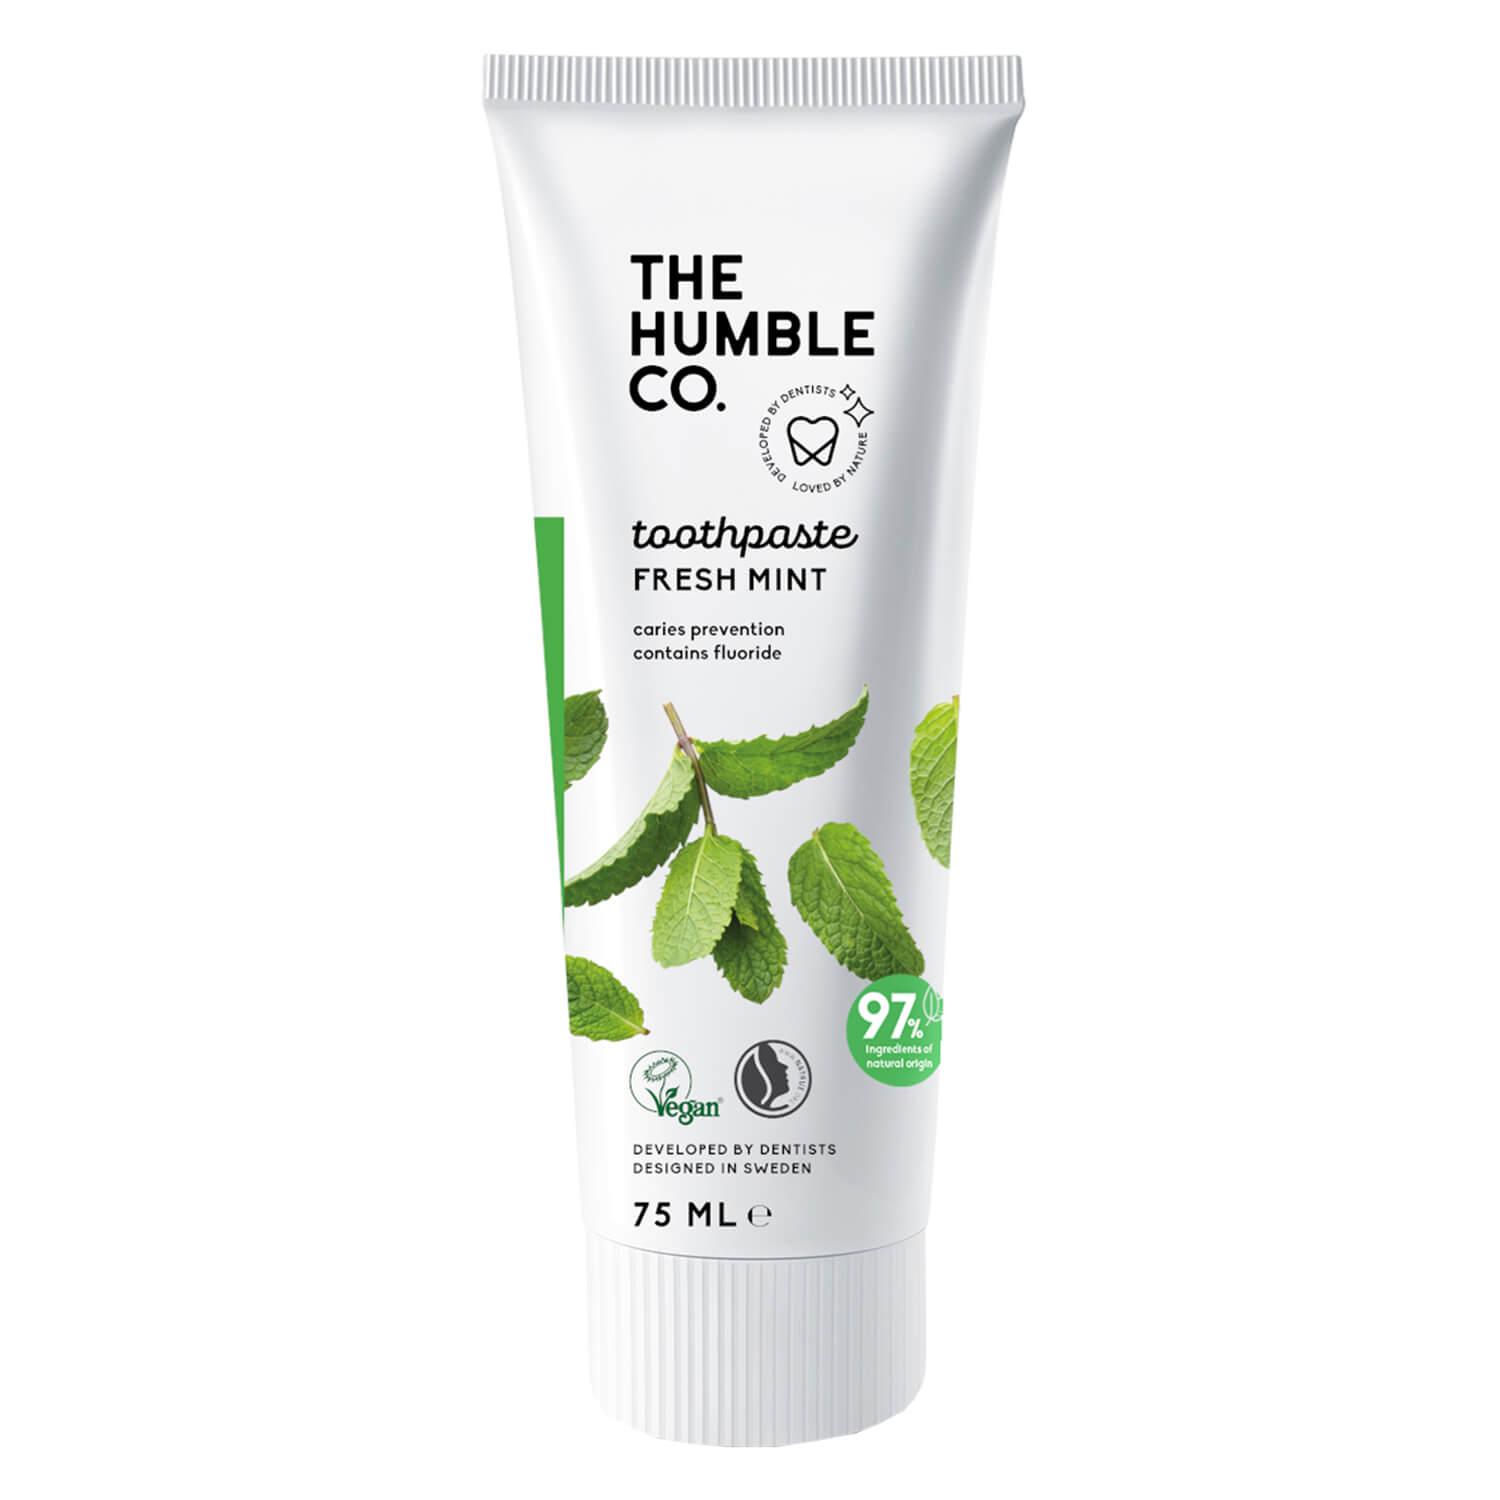 THE HUMBLE CO. - Humble Toothpaste Peppermint